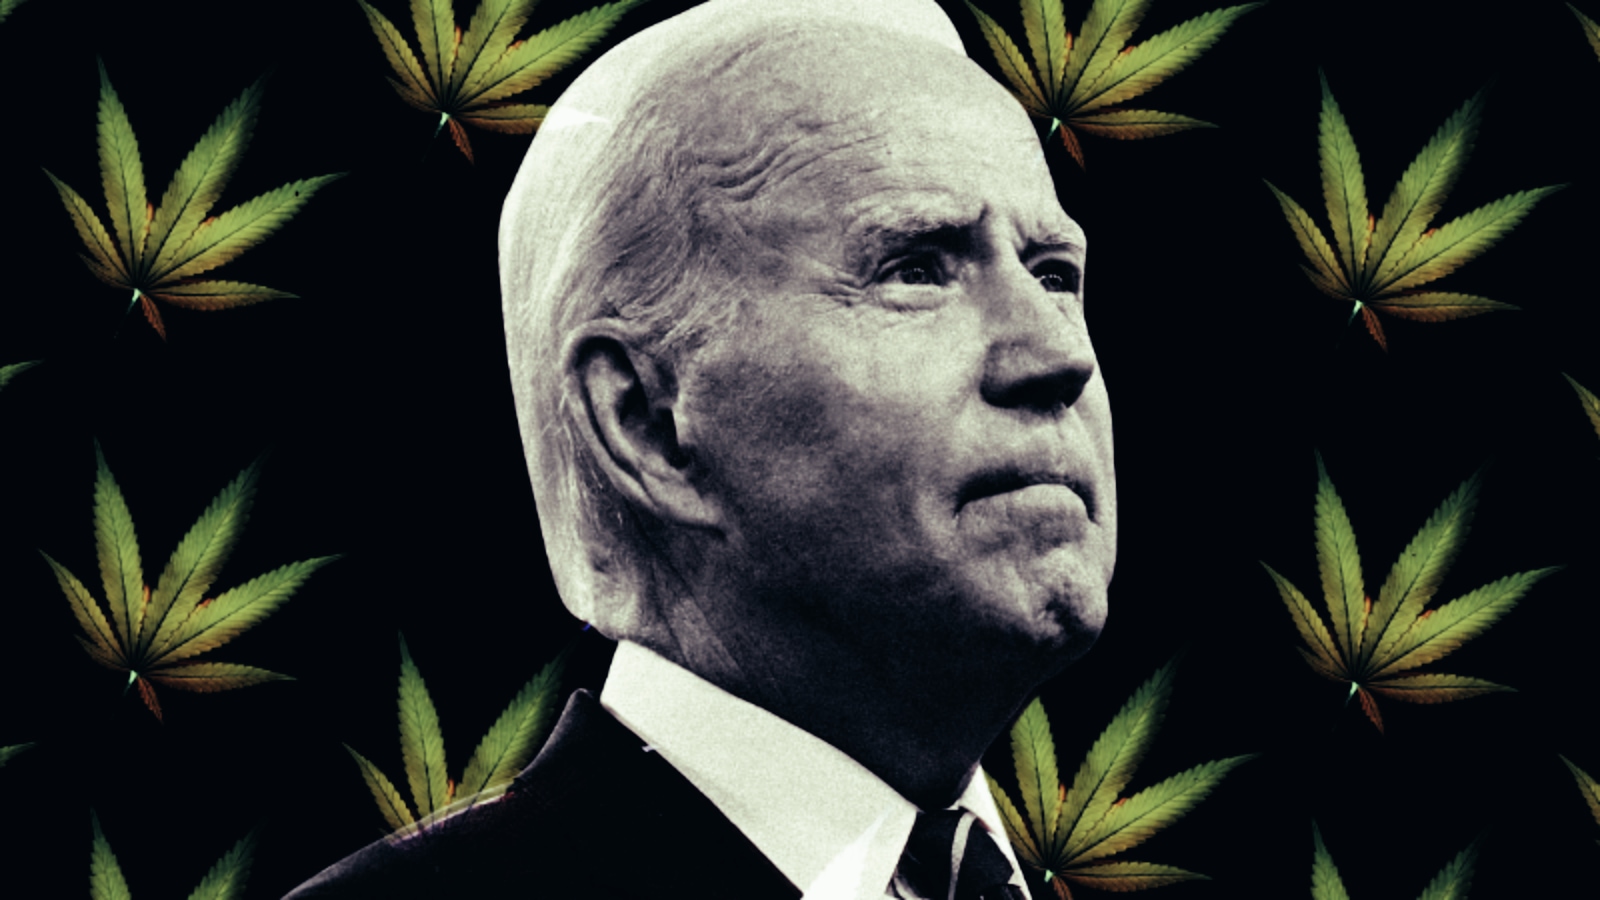 Will Rescheduling Weed Help Biden with the youth?